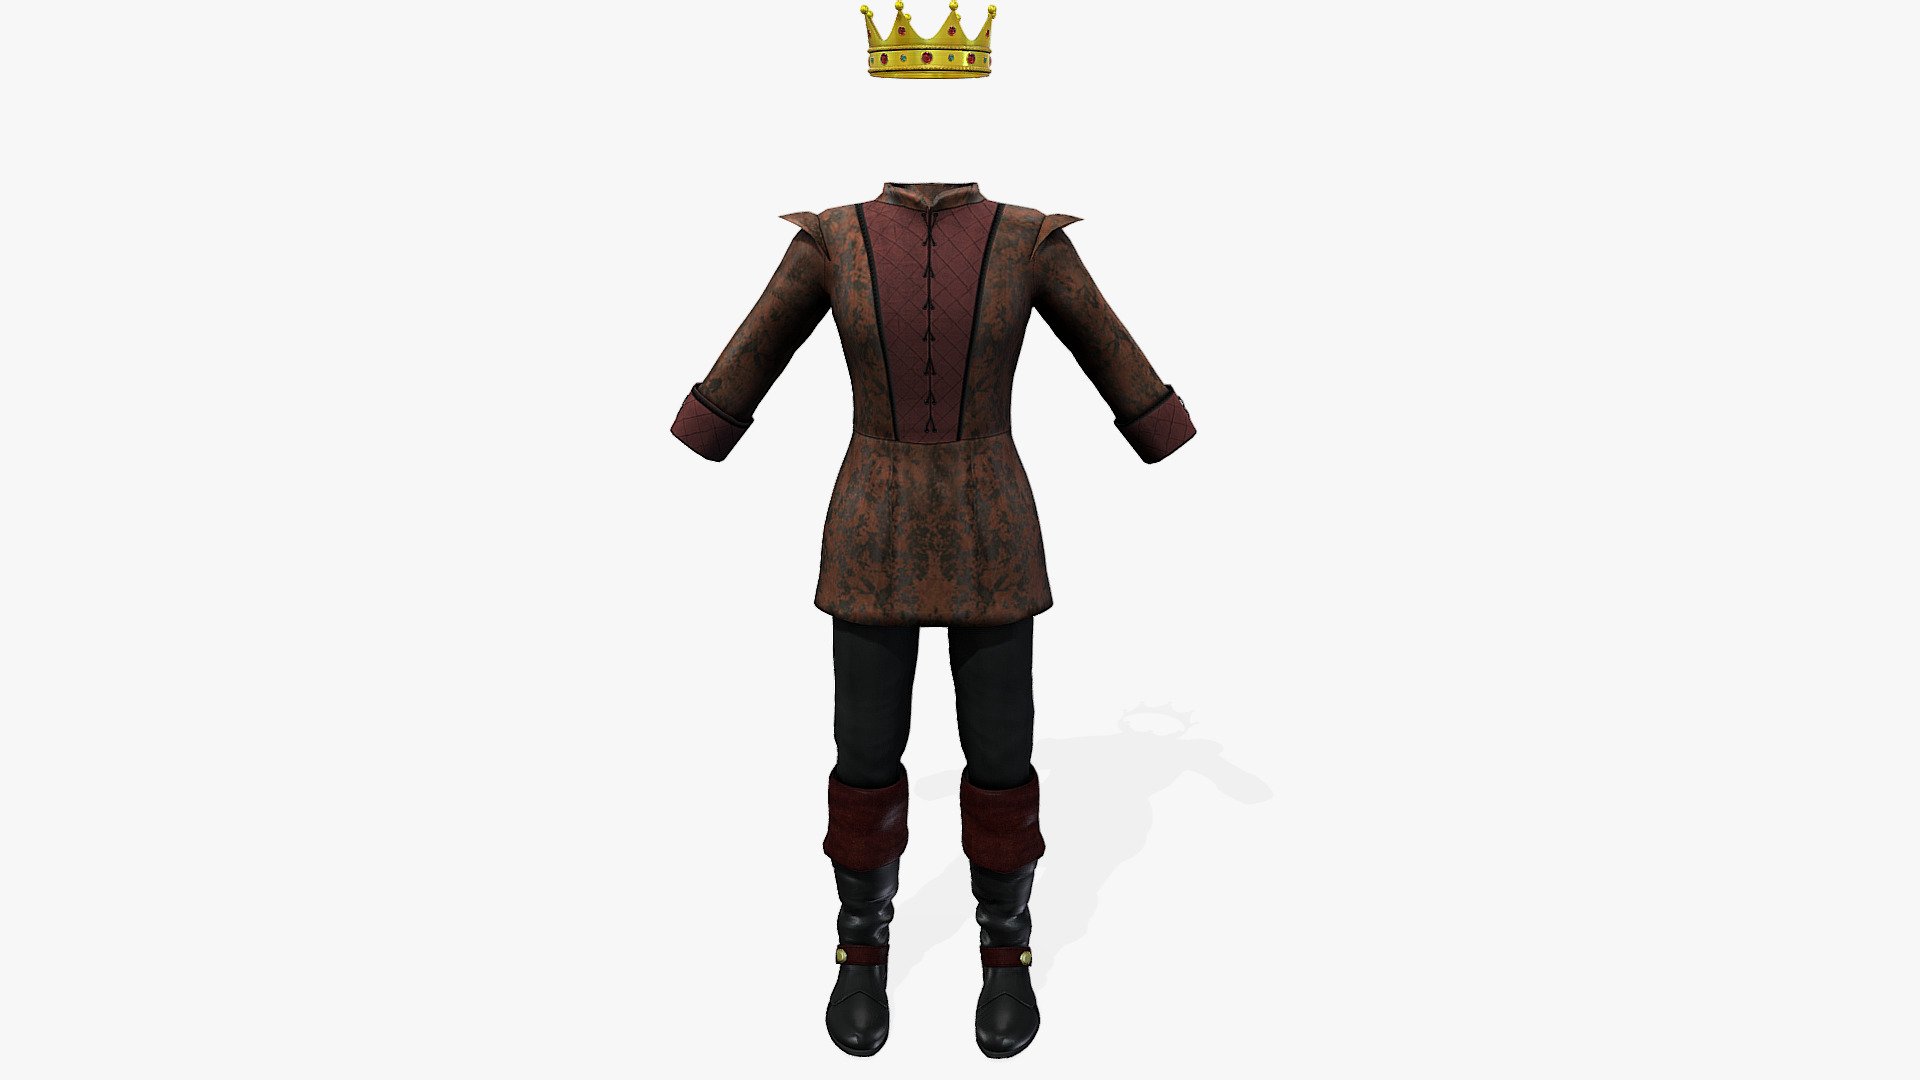 Dress + Boots + Crown

Can fit to any character

Ready for games

Clean topology

No overlapping unwrapped UVs

High quality realistic textues

FBX, OBJ, gITF, USDZ (request other formats)

PBR or Classic

Please ask for any other questions

Type     user:3dia &ldquo;search term